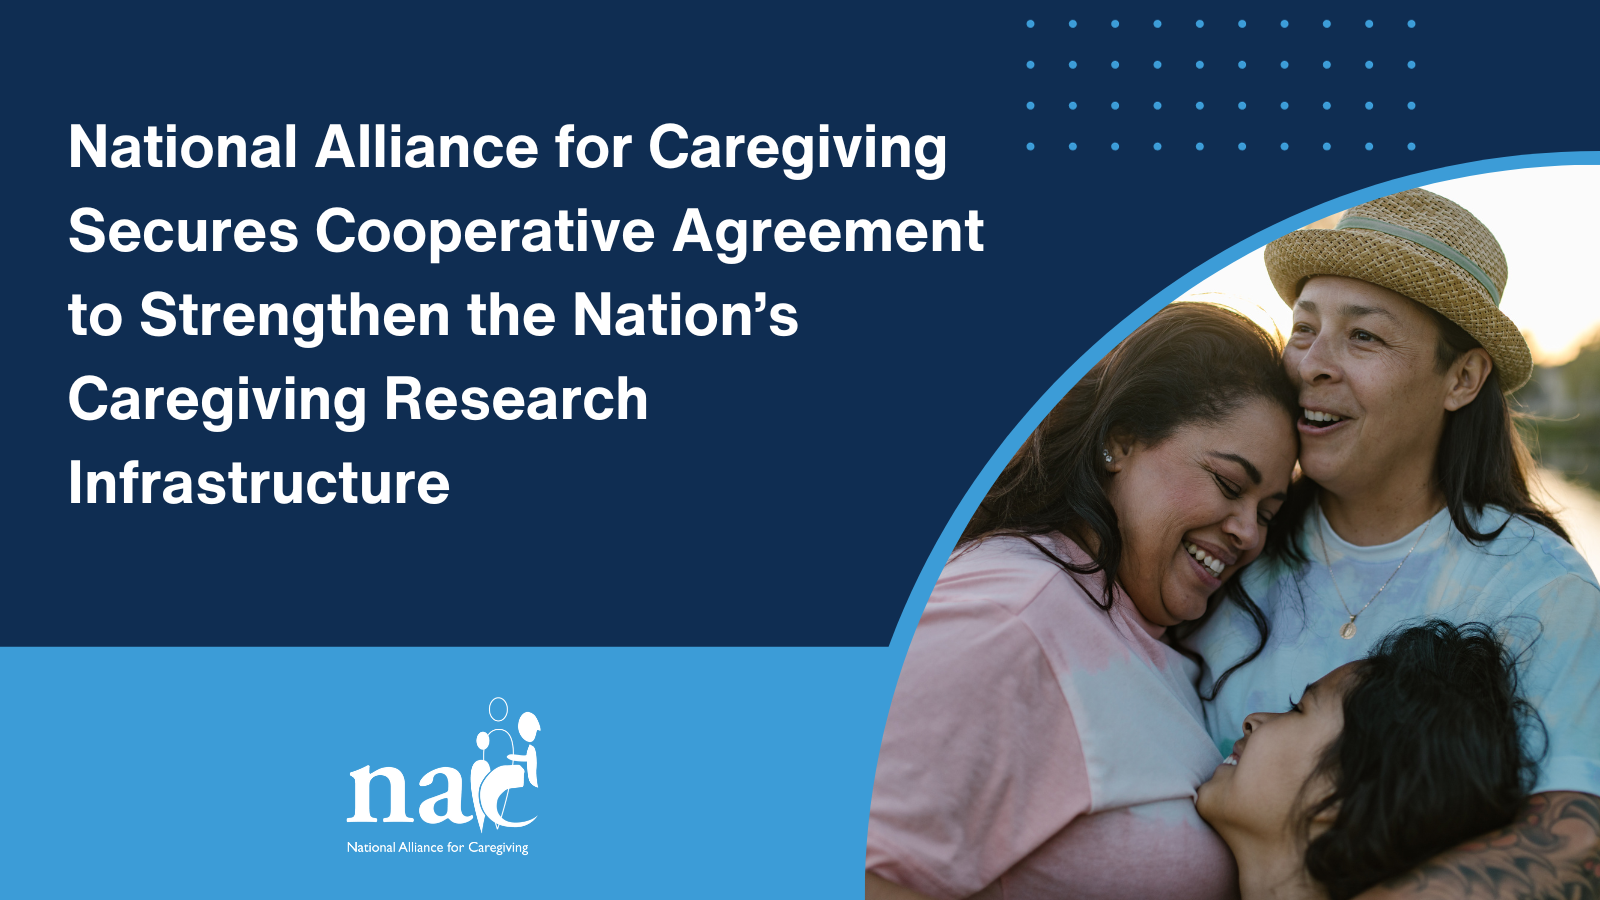 National Alliance for Caregiving Secures $2 Million Cooperative Agreement to Strengthen the Nation’s Caregiving Research Infrastructure Featured Image